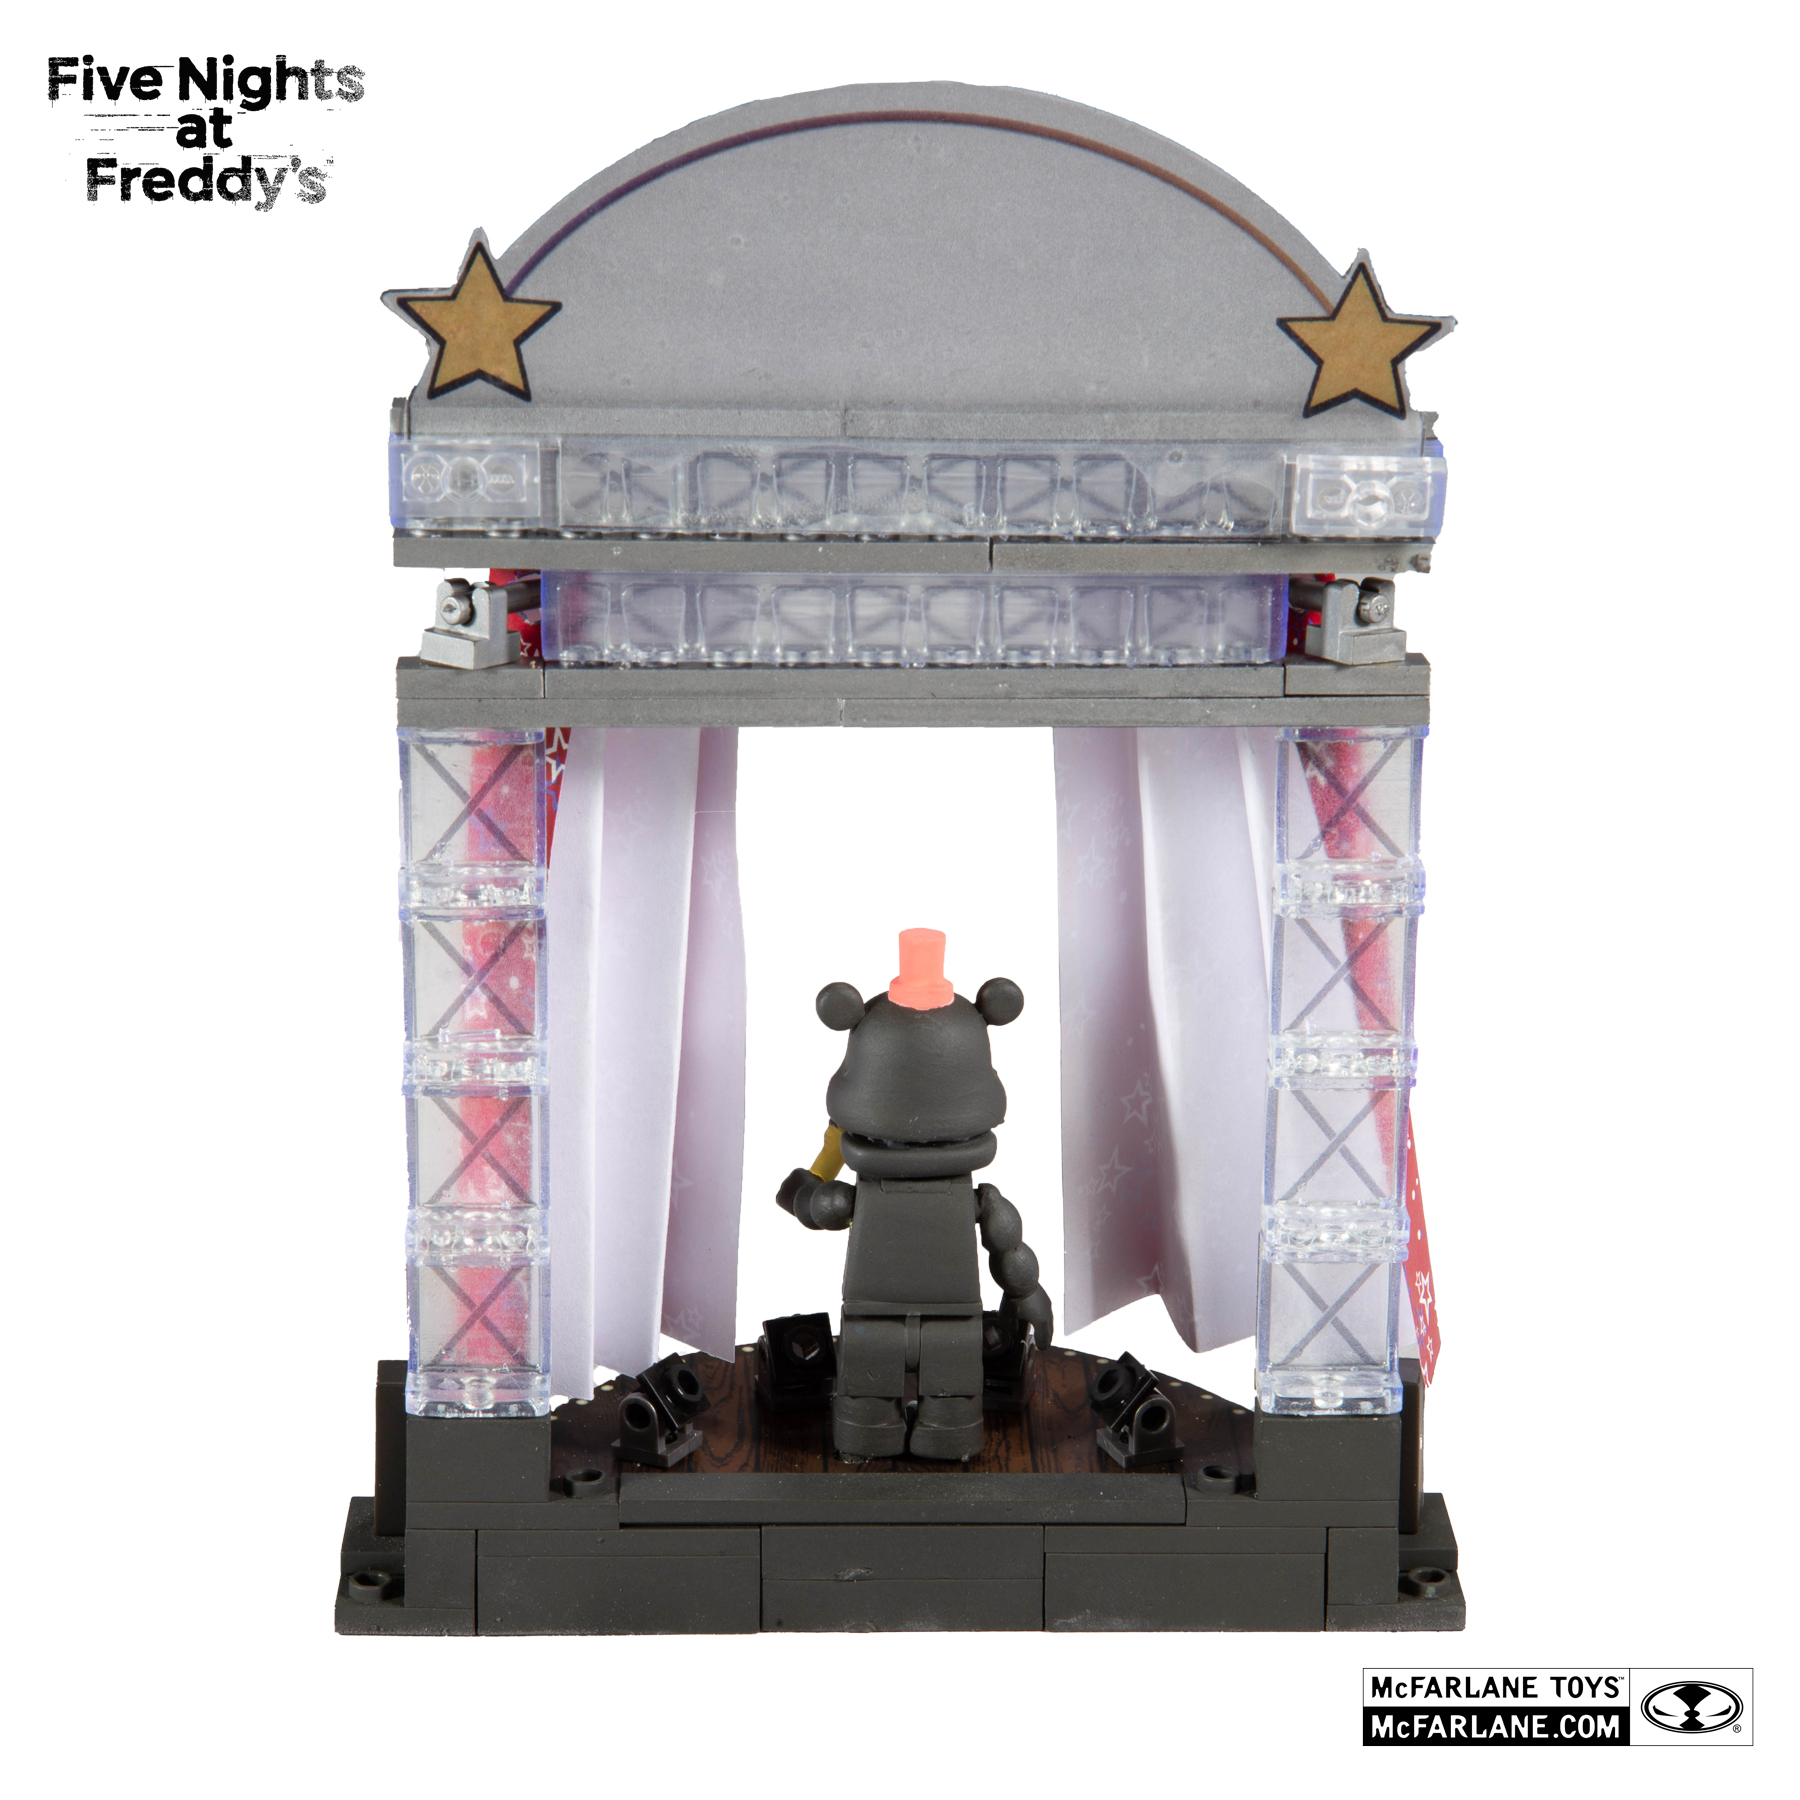 Five Nights at Freddys Star Curtain Stage 72 PC Lefty McFarlane Toys Hot for sale online 